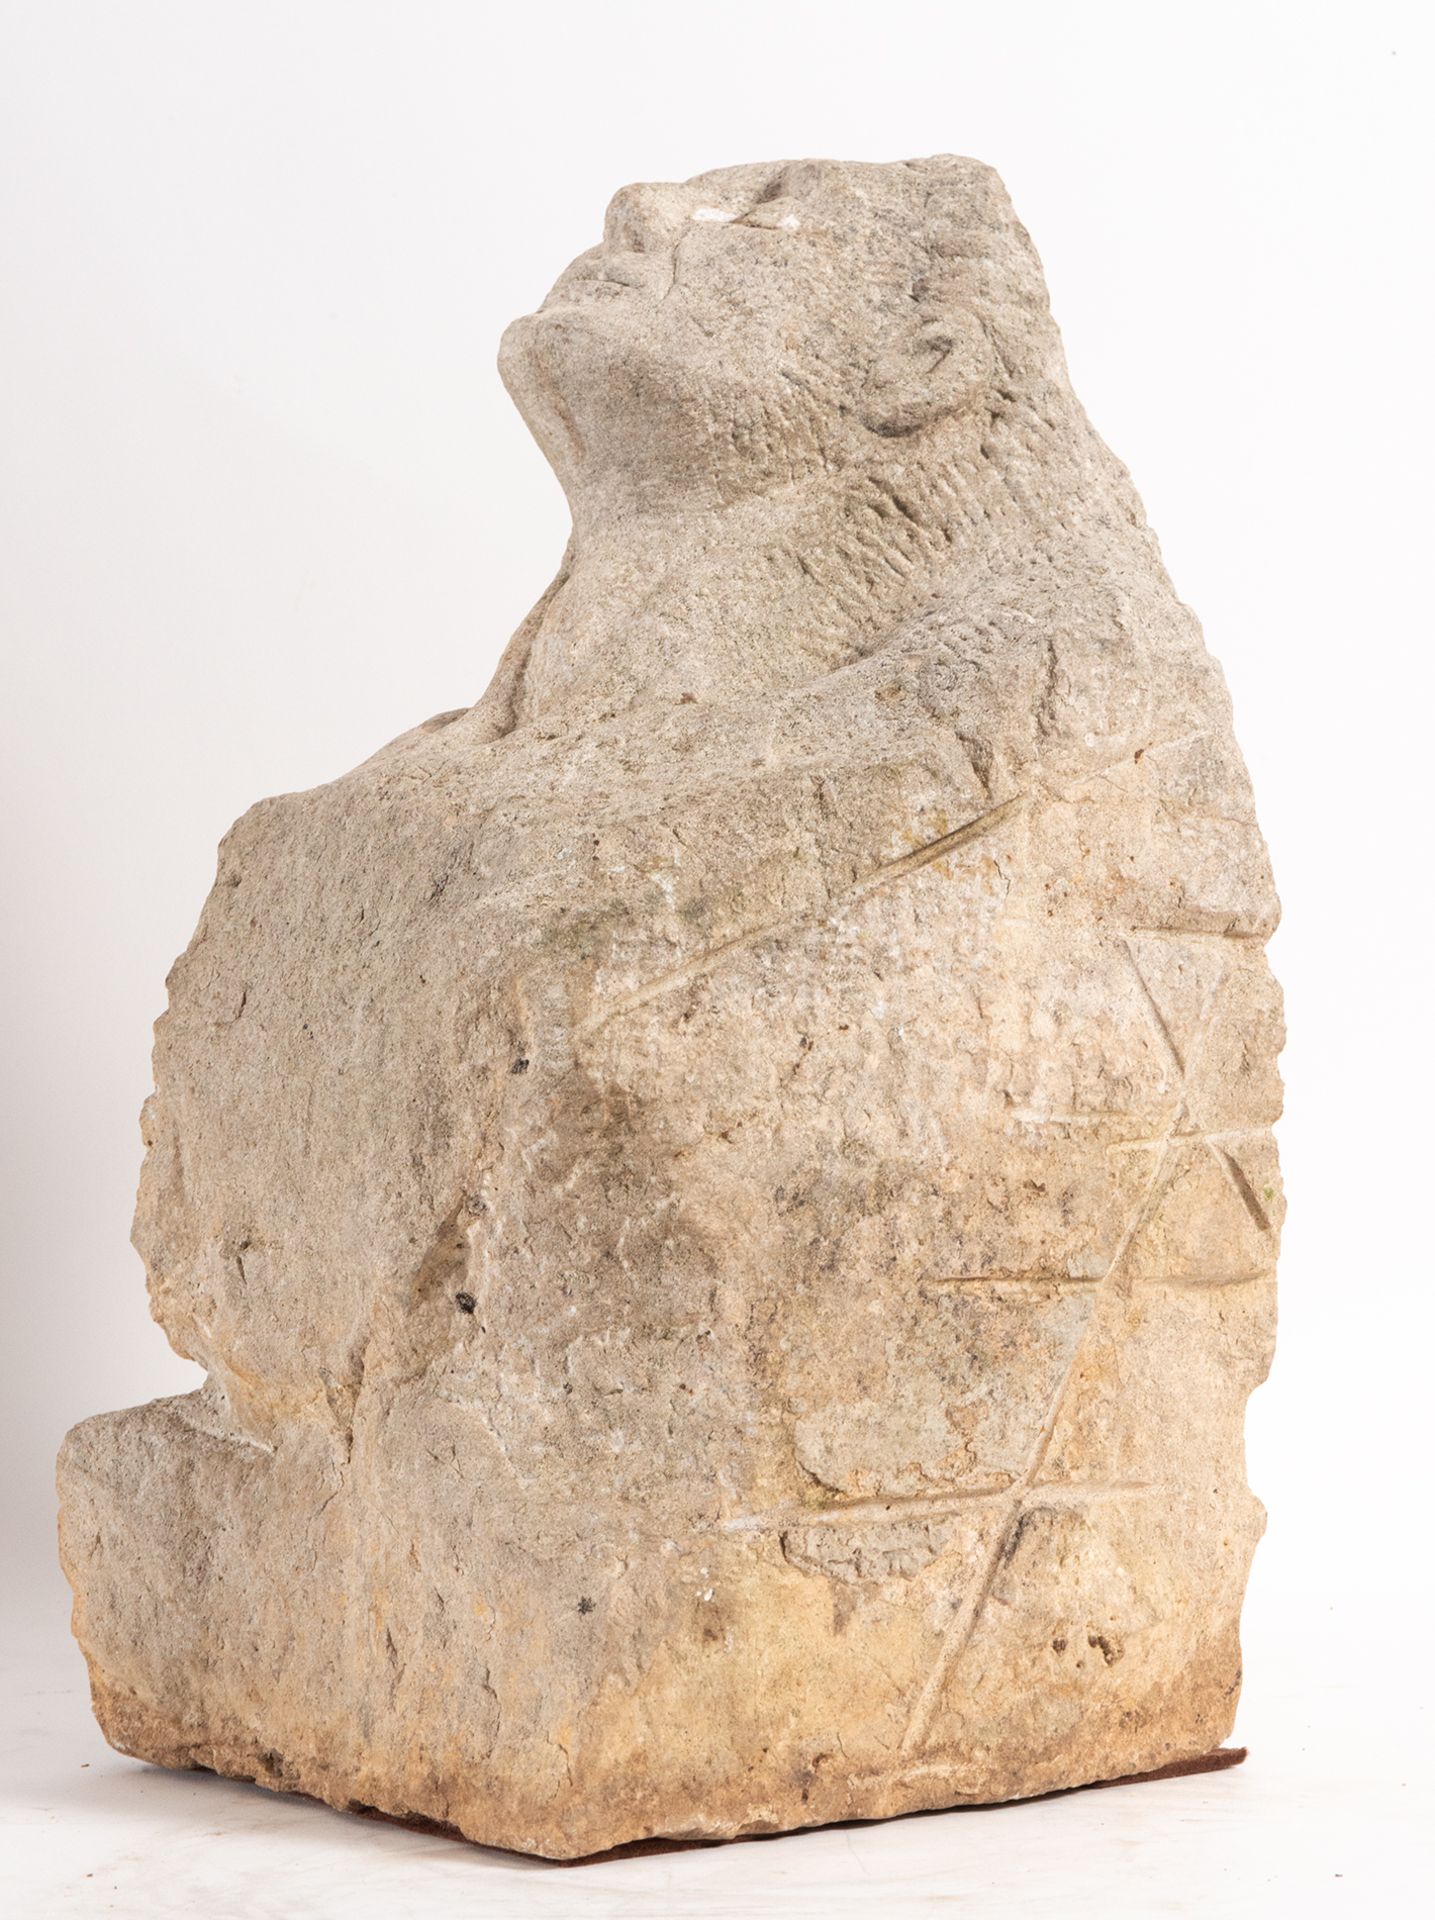 Gothic Gargoyle in stone, 14th - 15th centuries - Image 2 of 4